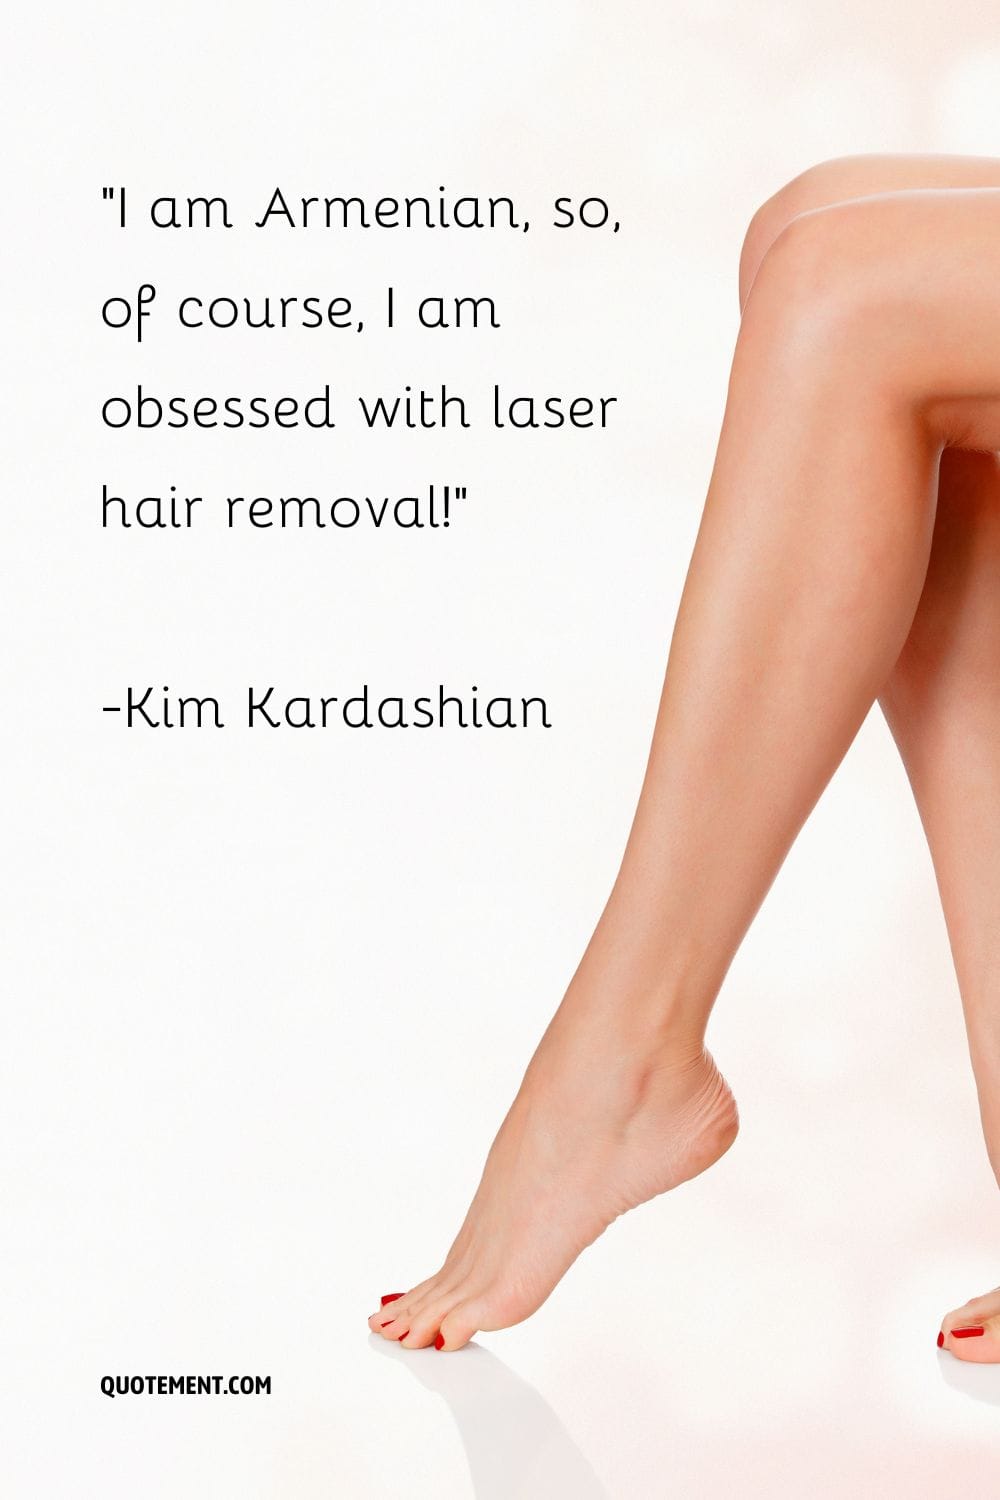 I am Armenian, so, of course, I am obsessed with laser hair removal